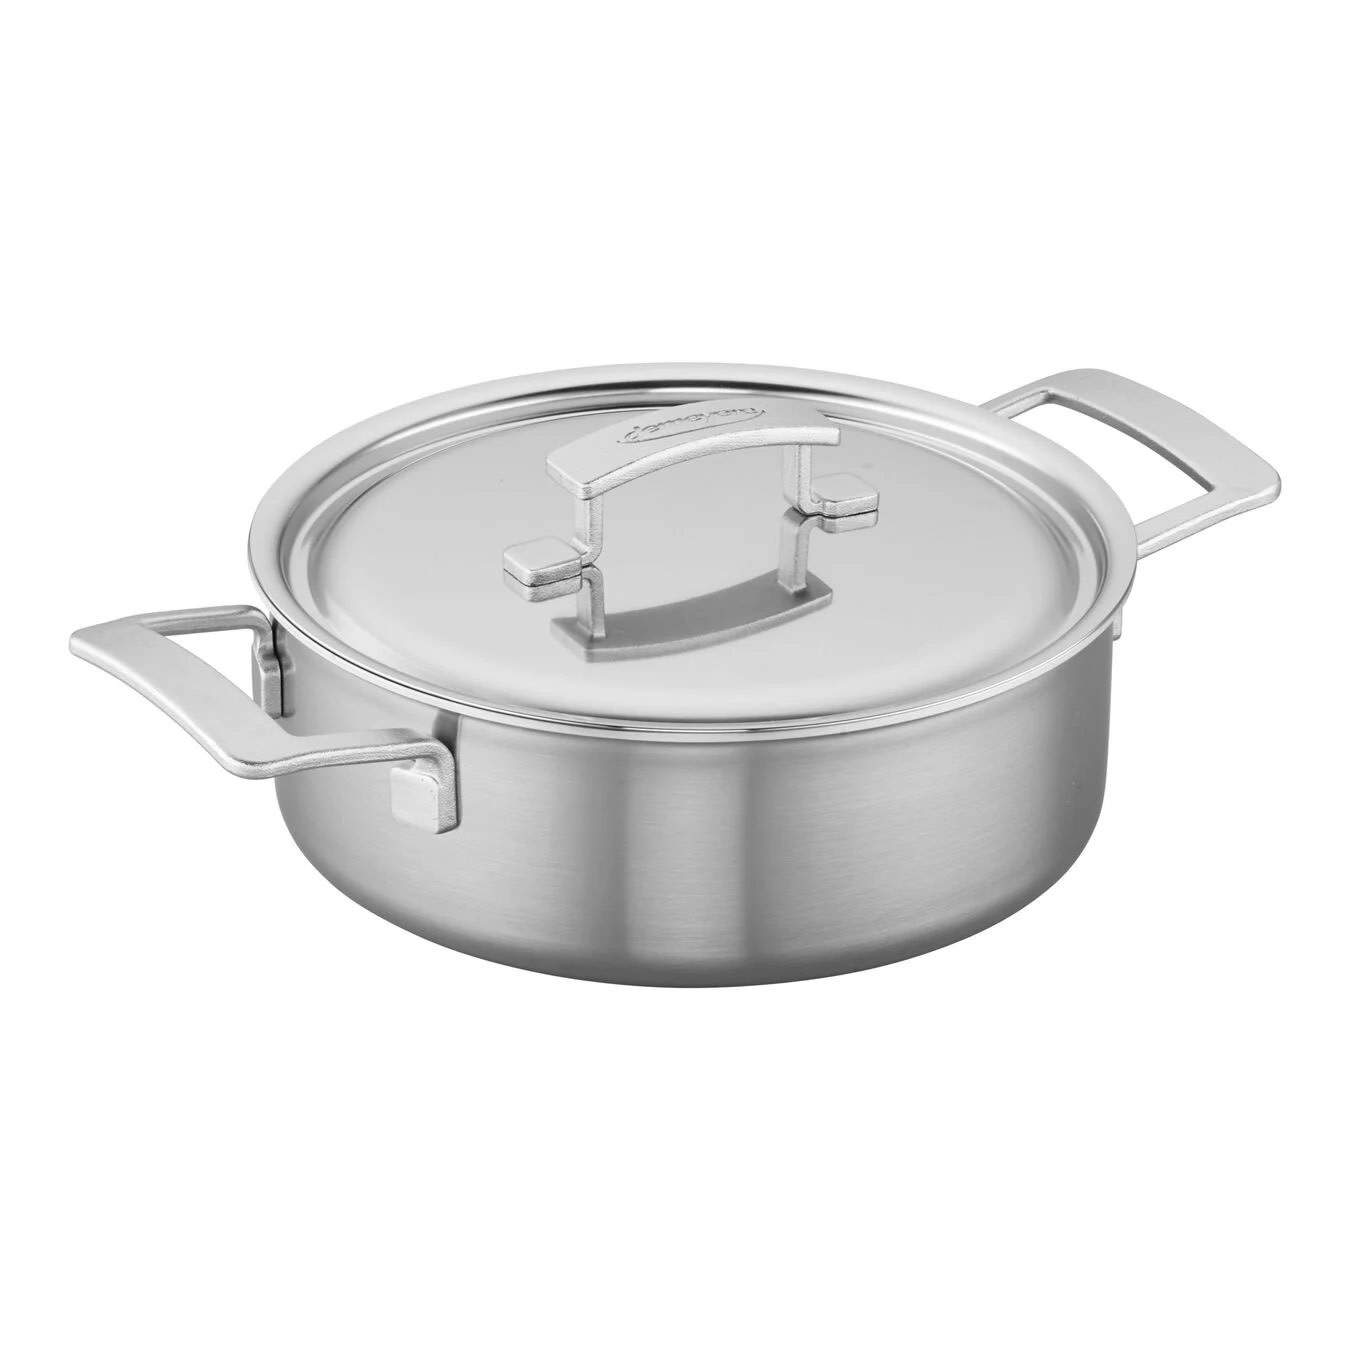 Made In Cookware - 4 Quart Stainless Steel Saucepan with Lid 